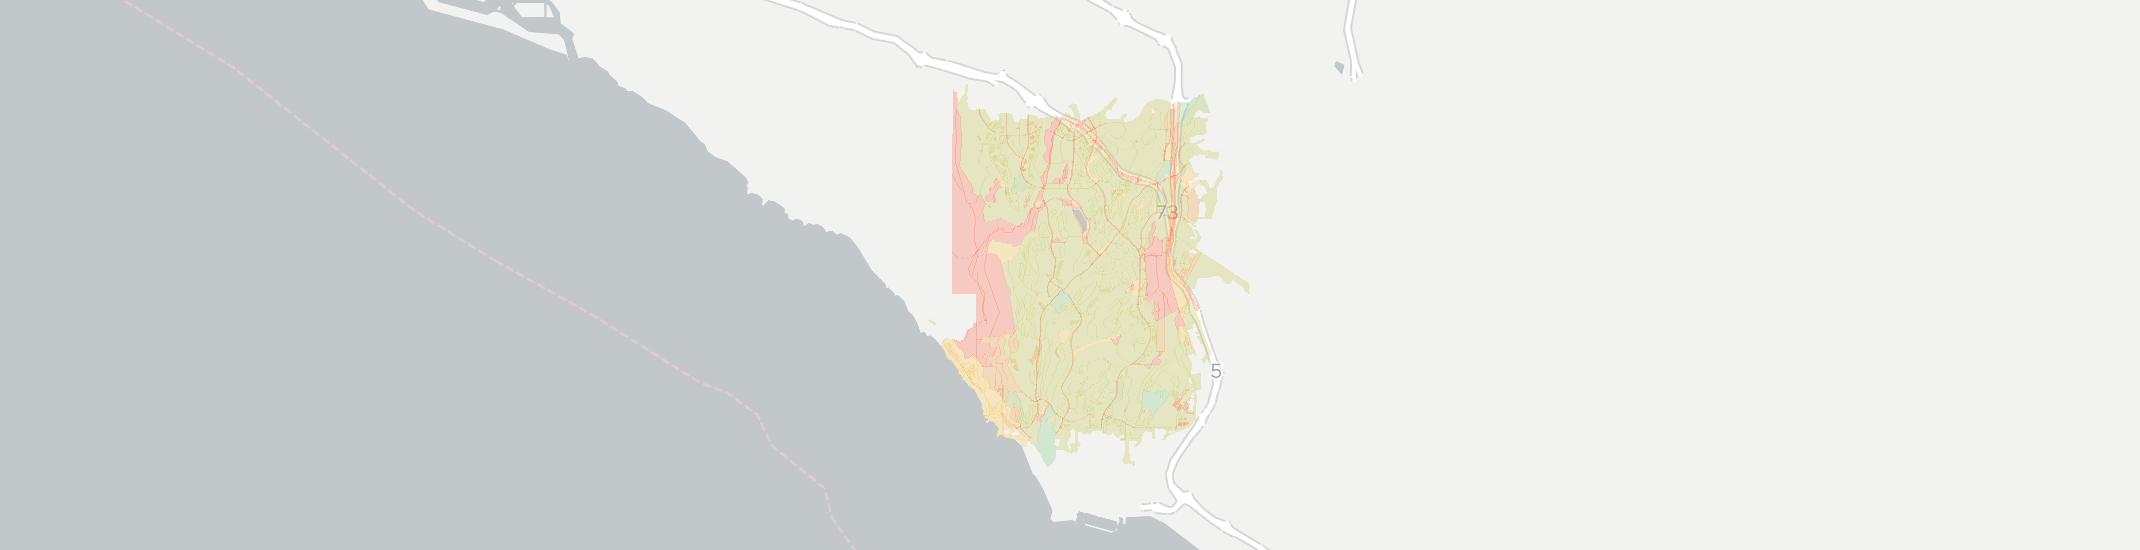 Laguna Niguel Internet Competition Map. Click for interactive map.